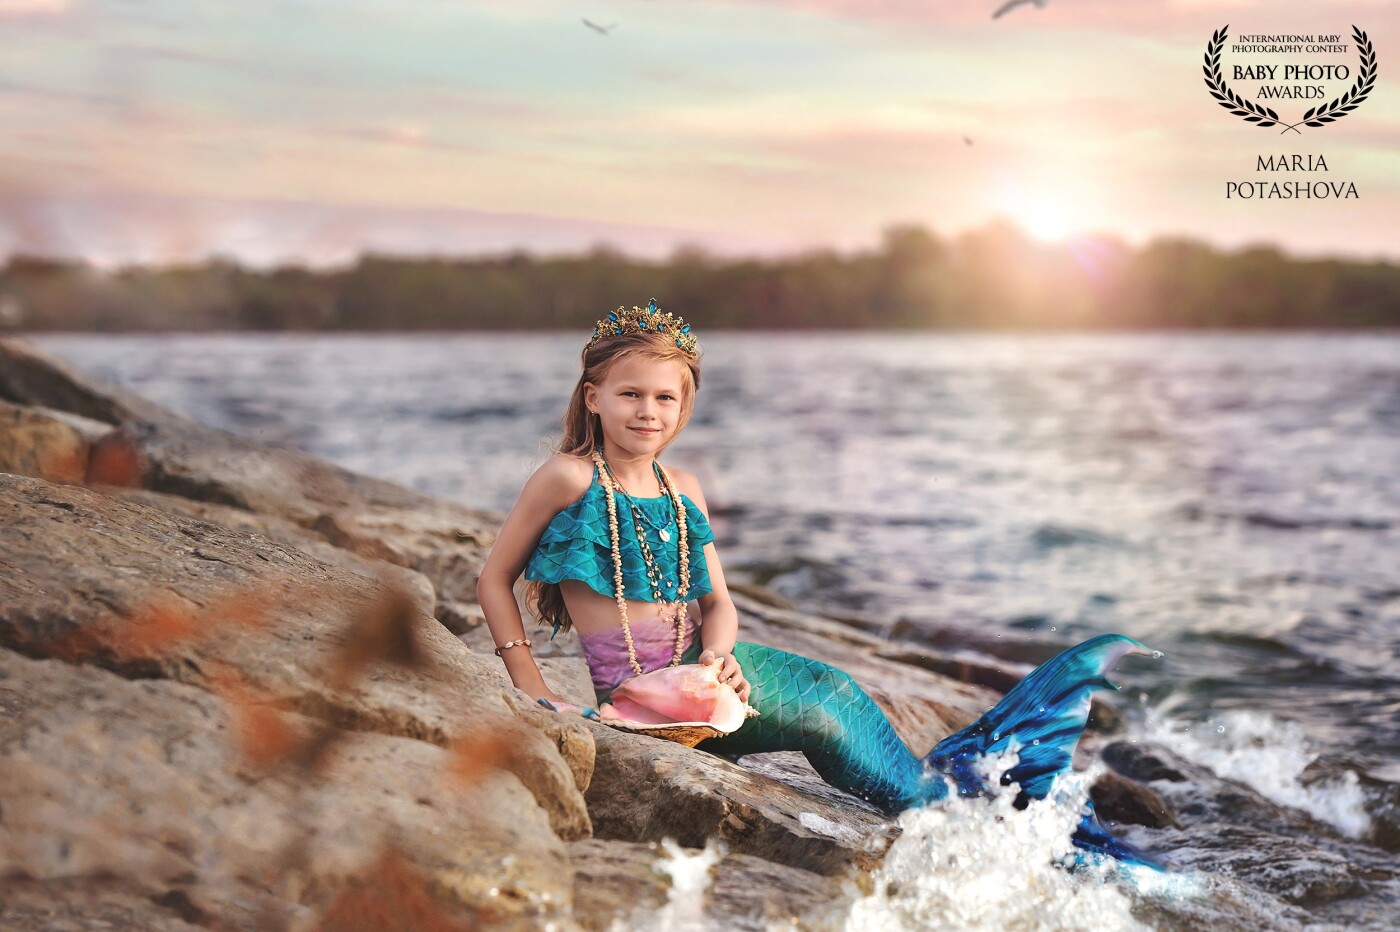 Thia is my daughter Evelina.  Swim fast, wear a crown, and dream big. Write your secrets in the sand and trust them with a mermaid. Be a mermaid.